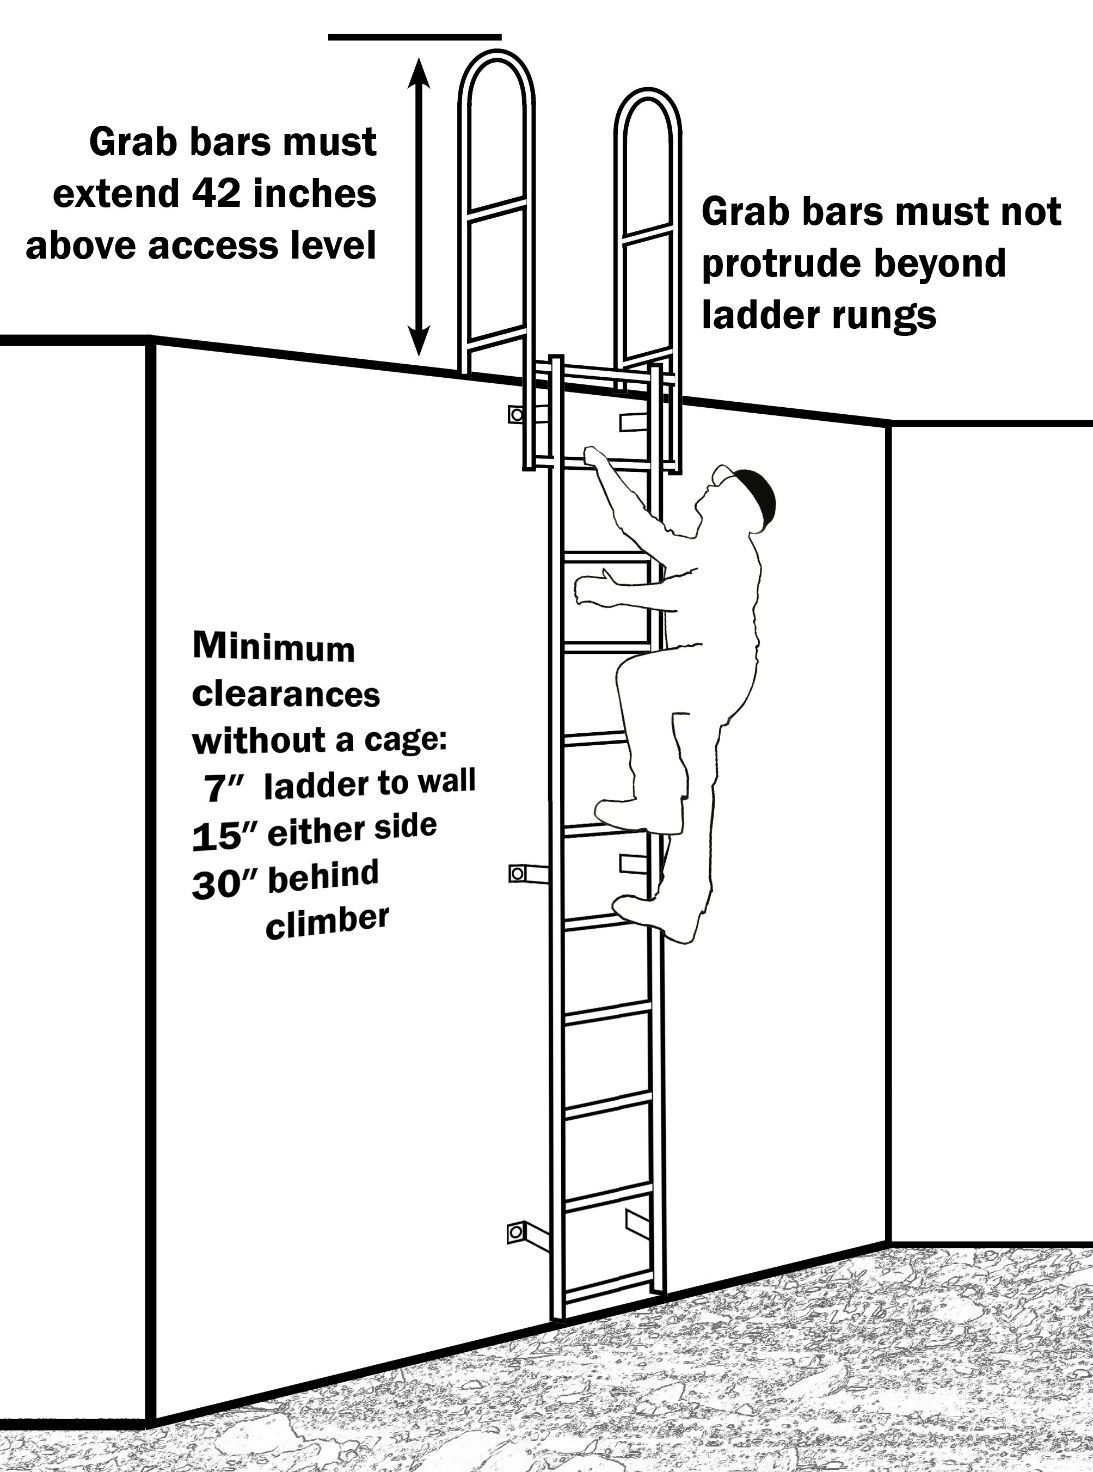 Basic configuration of a fixed ladder. 